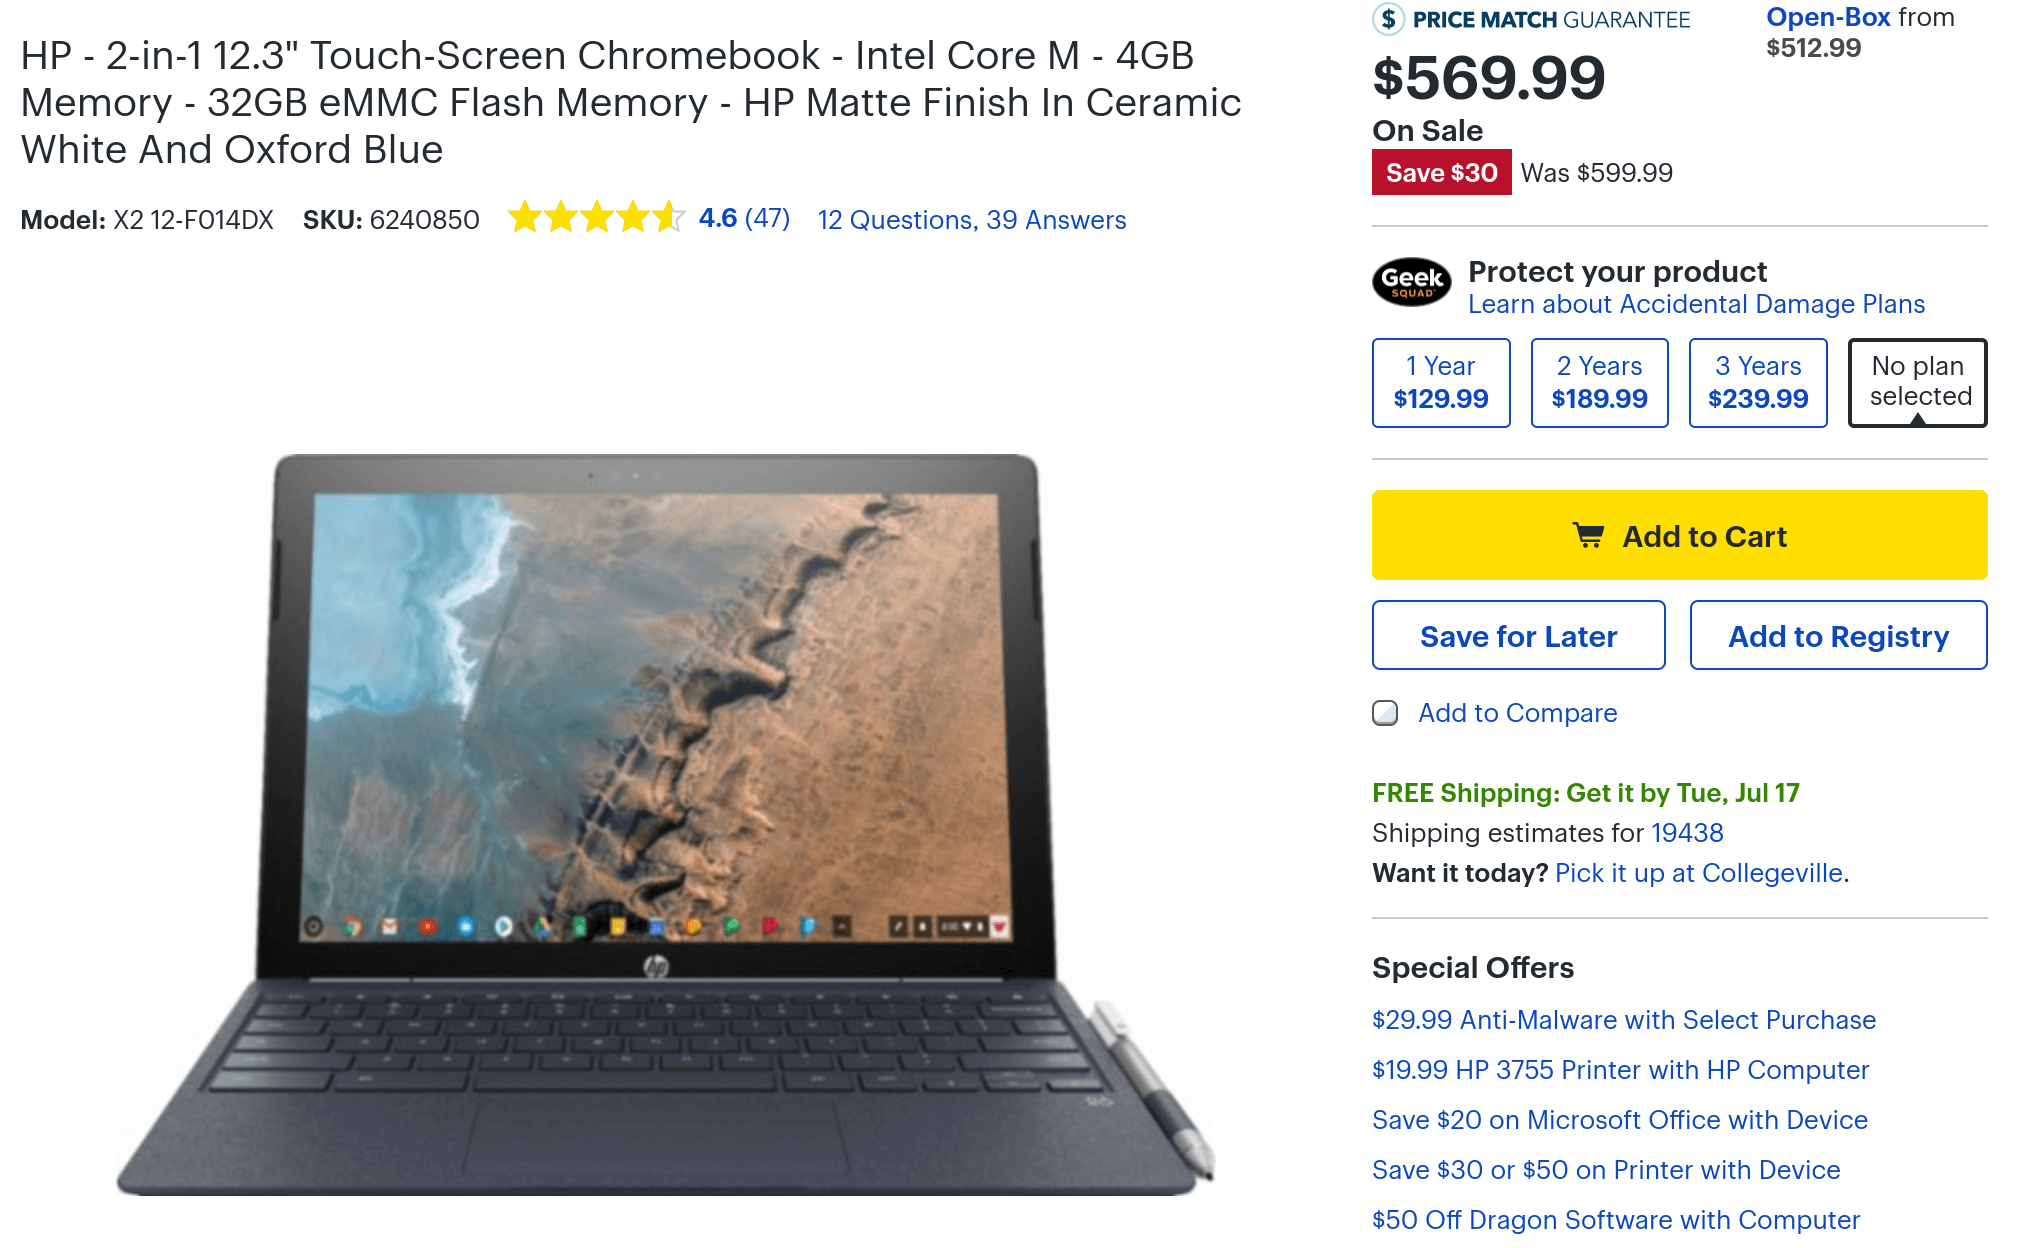 HP Chromebook X2 on sale at Best Buy